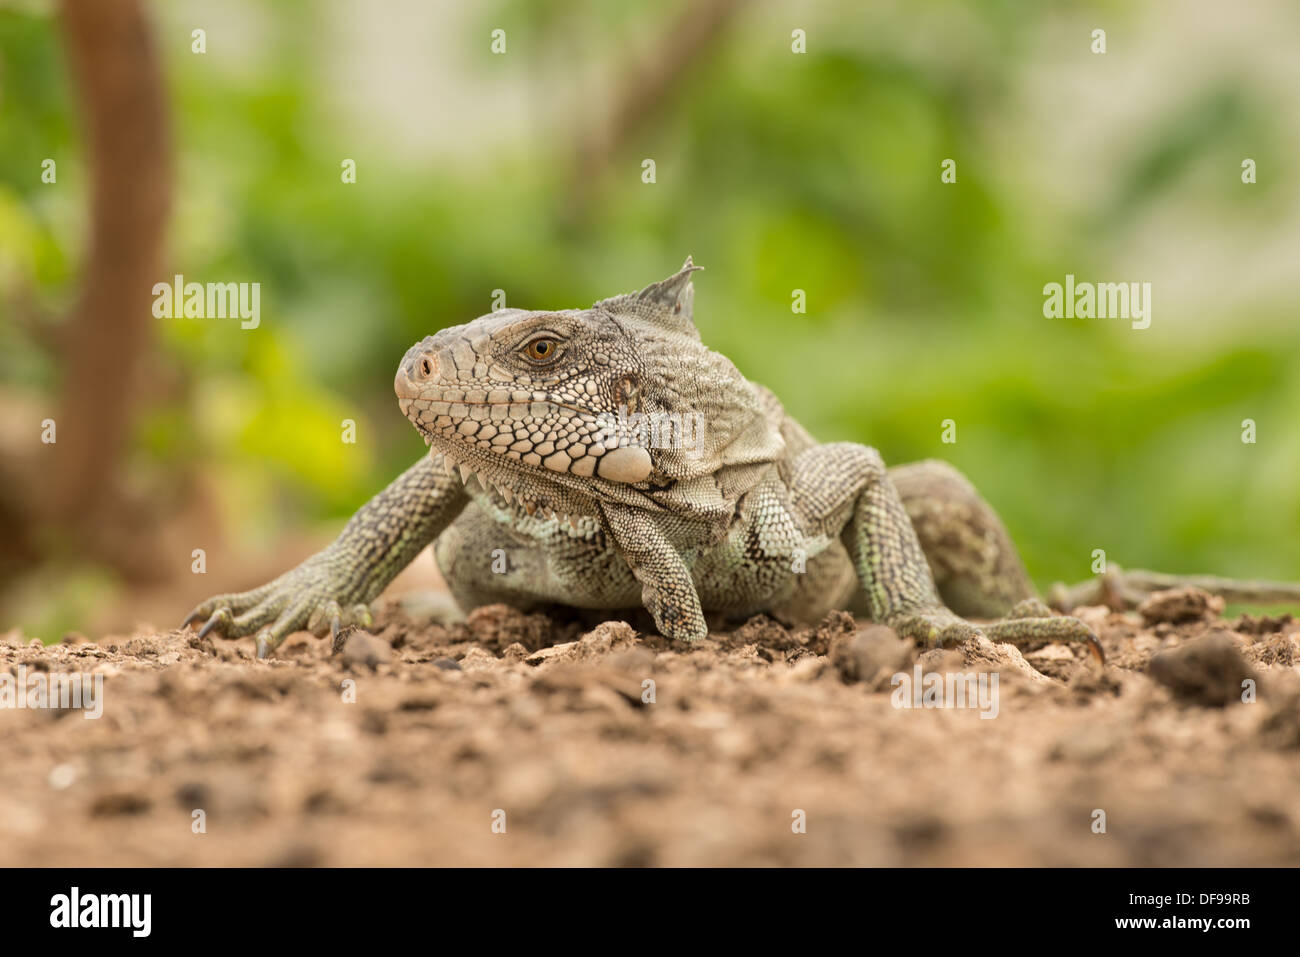 Stock photo of a green iguana posed on a beach in the Pantanal. Stock Photo